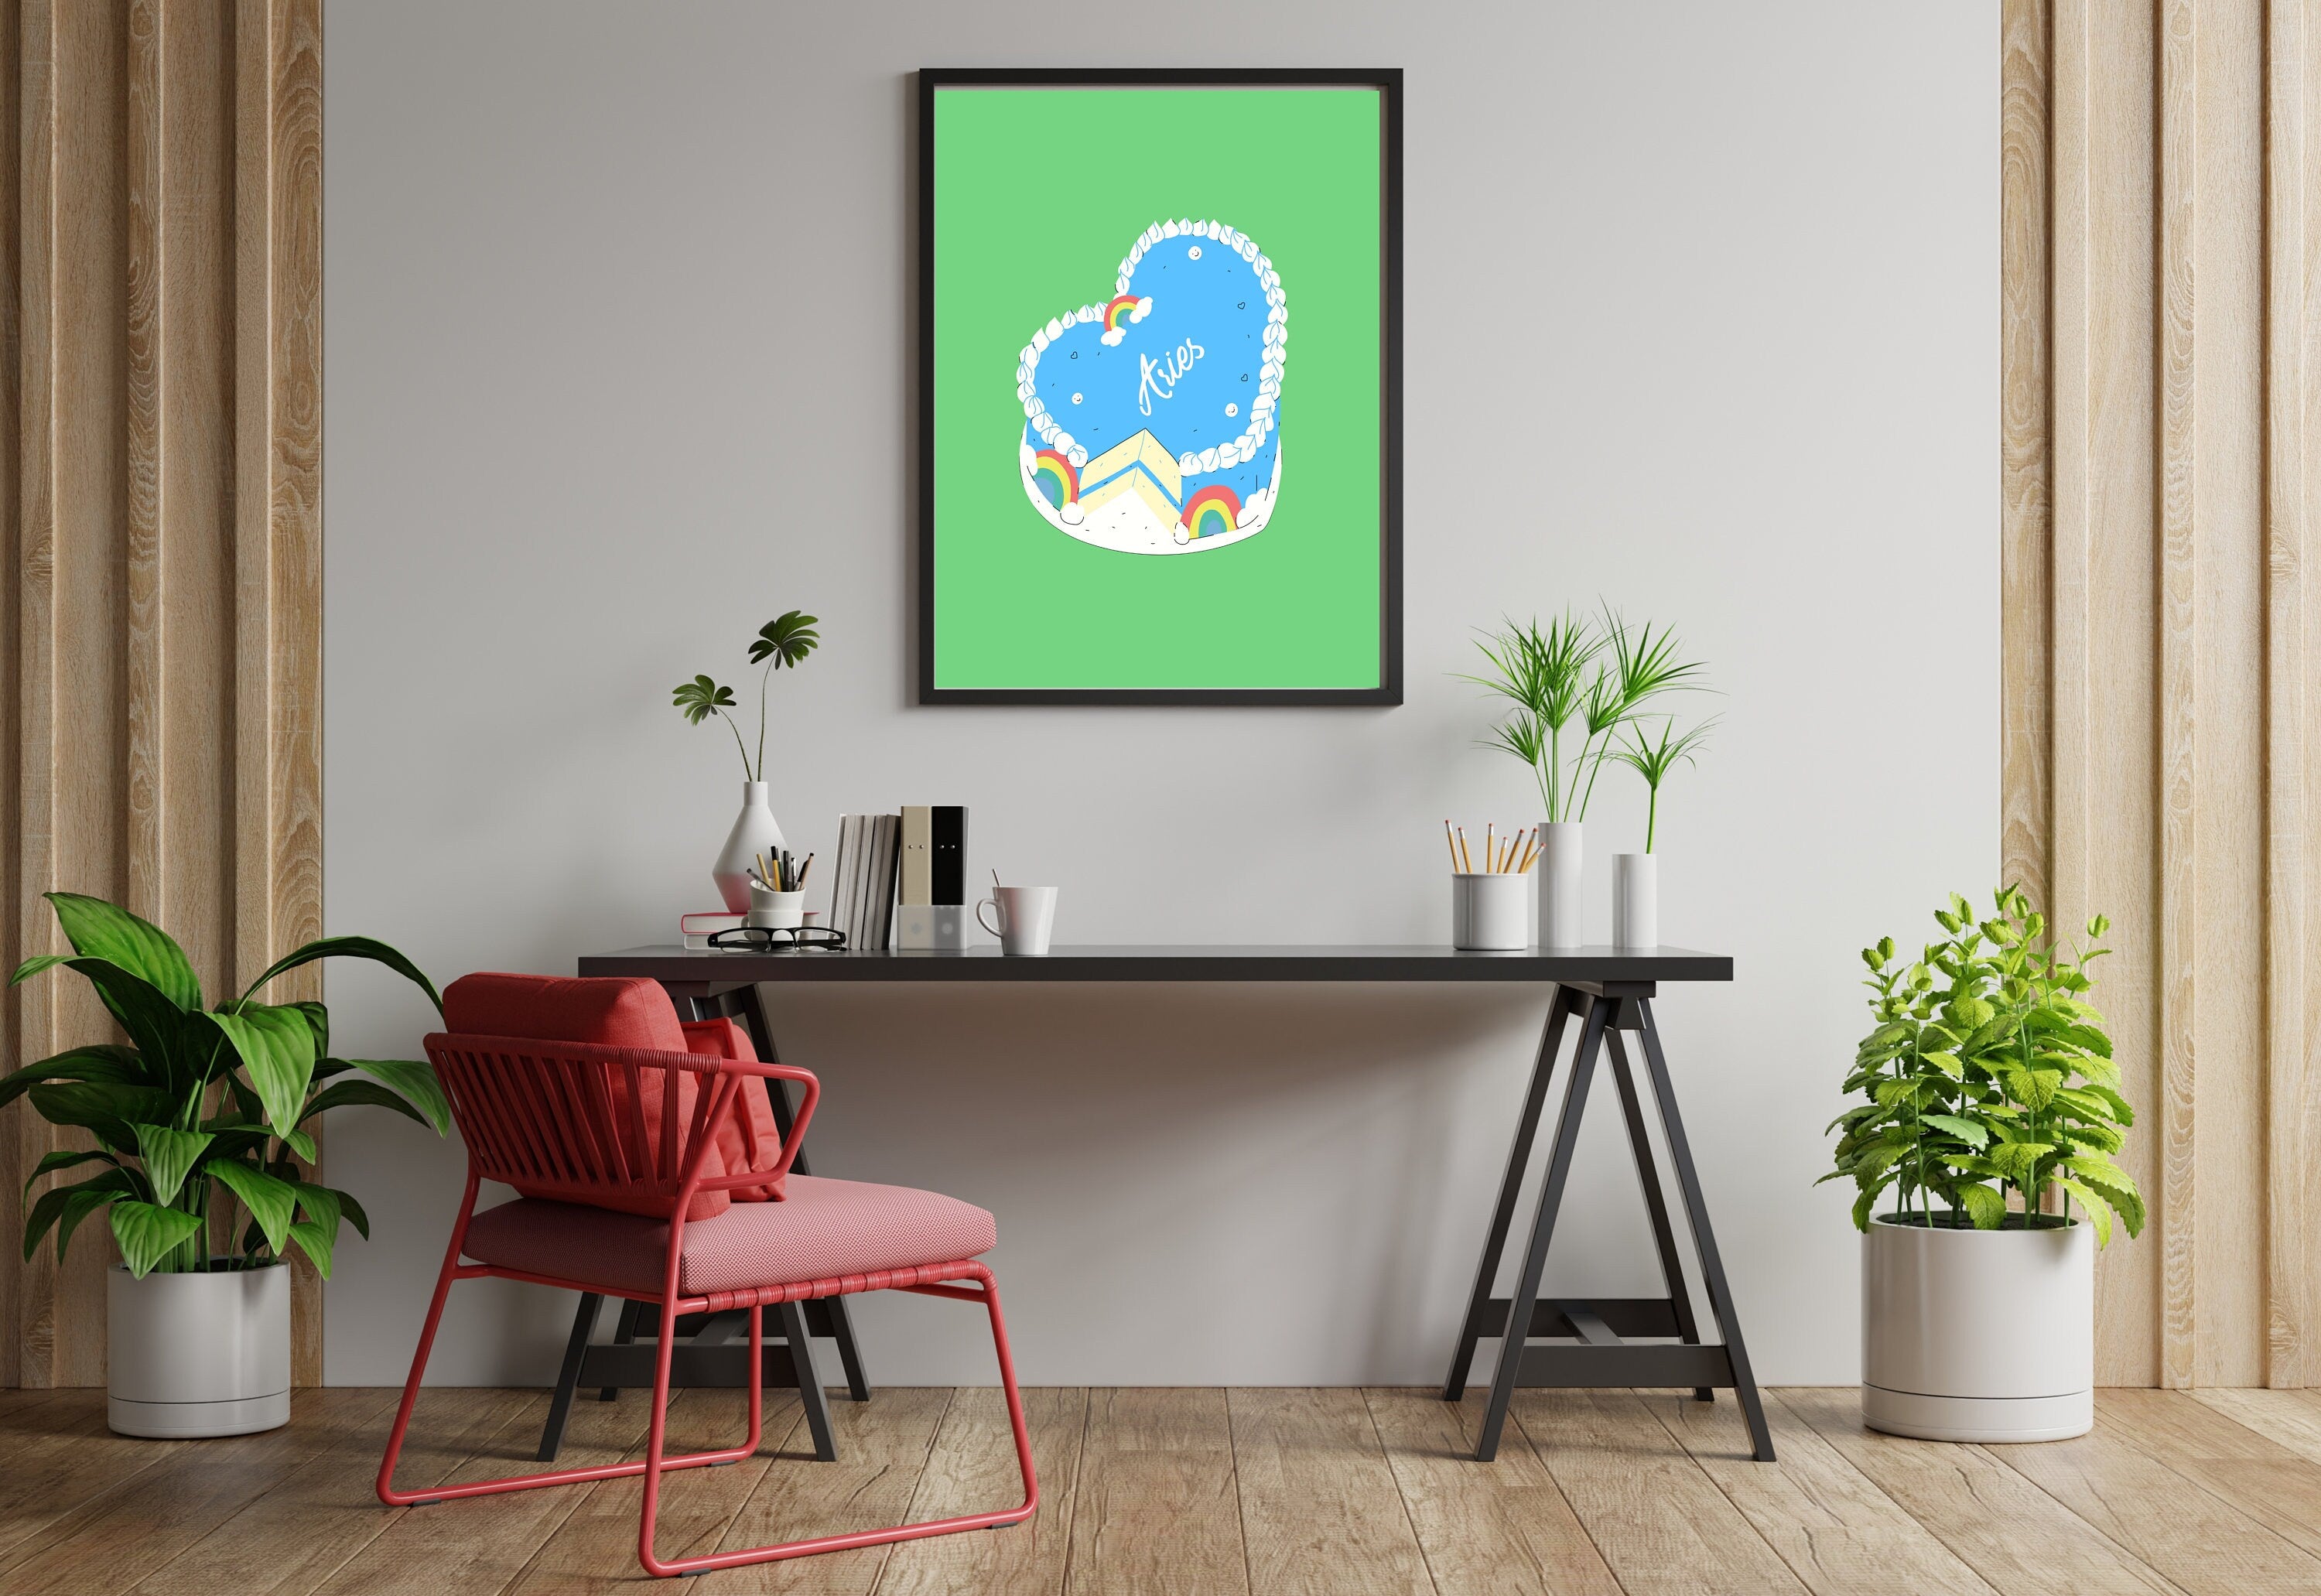 Green digital art print of an Aries-themed cake poster, featuring a stylized ram design atop a cake, available at GS Print Shoppe